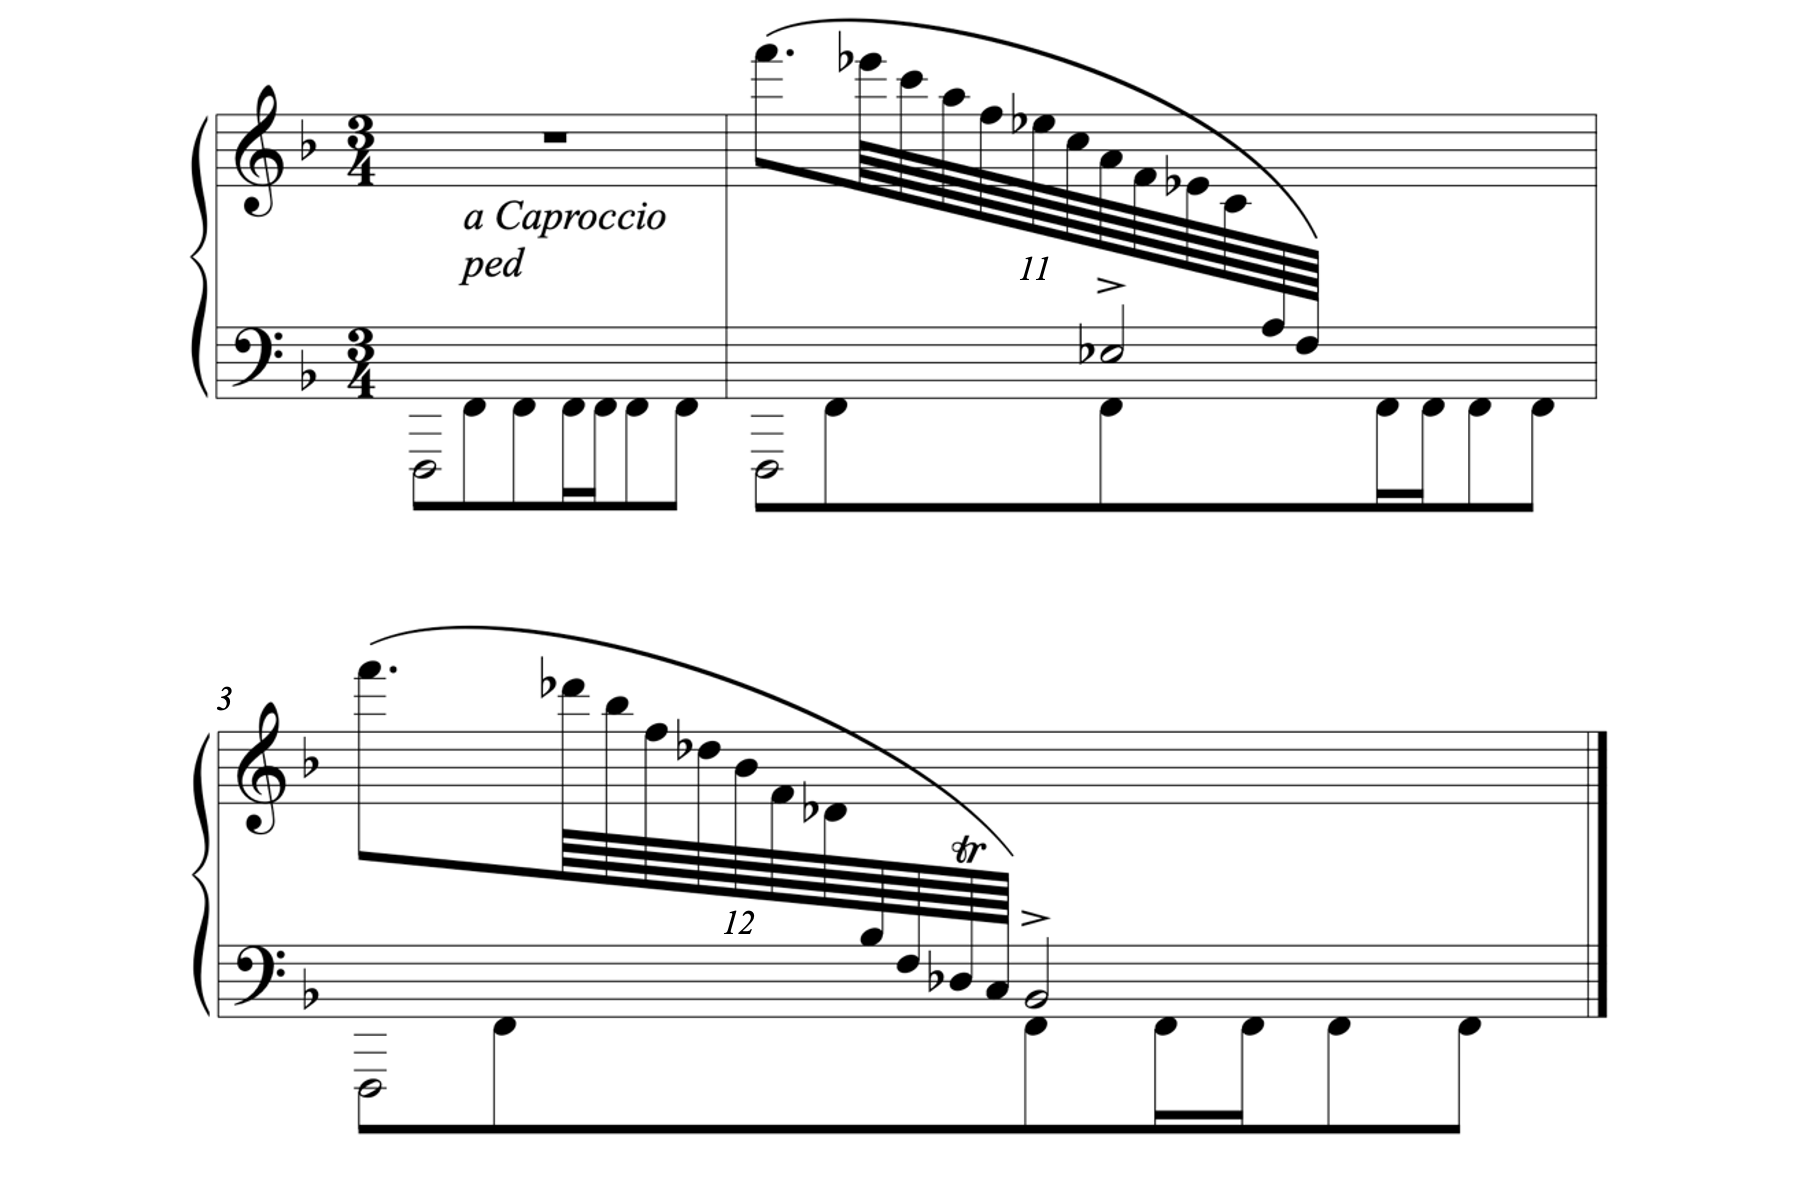 Other duplets (11-tuplet and 12-tuplet) in Szymanowska's Fantasie for the piano